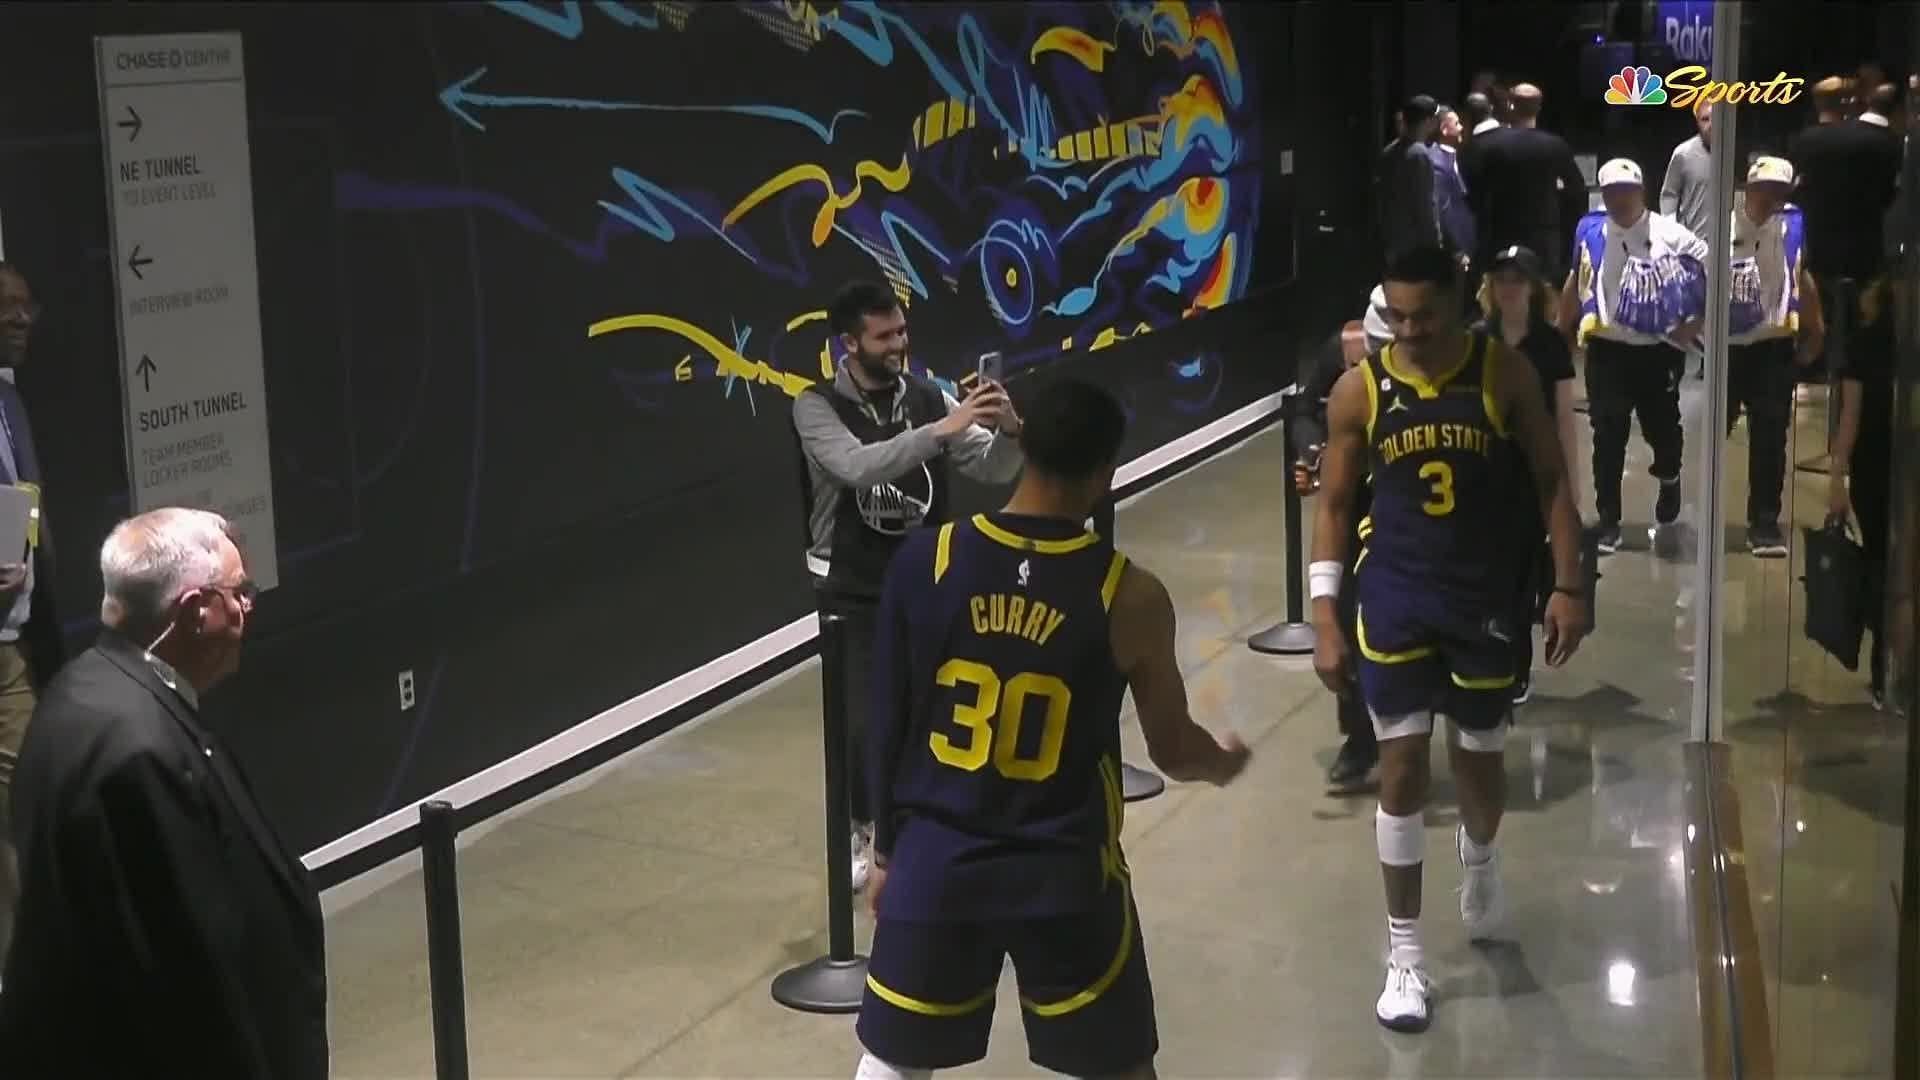 Jordan Poole reacts to Steph Curry throwing mouth piece, ejected vs.  Grizzlies